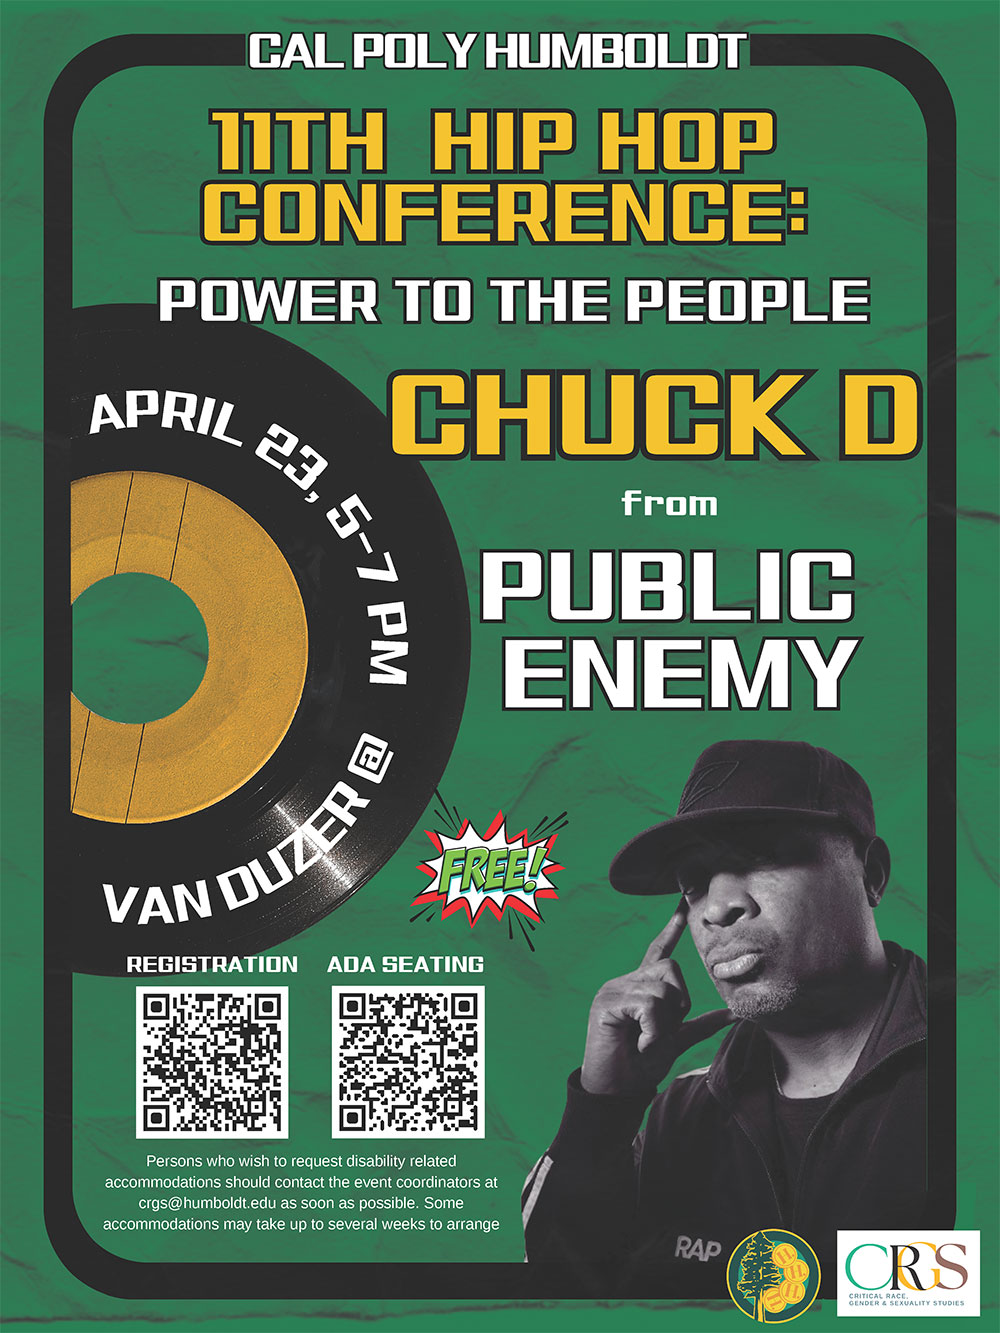 Poster reads: 11th Hip Hop Conference: Power to the People. Chuck D from Public Enemy. April 23, 5-7 p.m. at the Van Duzer Theatre. Free. Persons who wish to request disability related accommodations should  contact the event coordinators at crgs@humboldt.edu as soon as possible. Some accommodations take up to several weeks to arrange. 